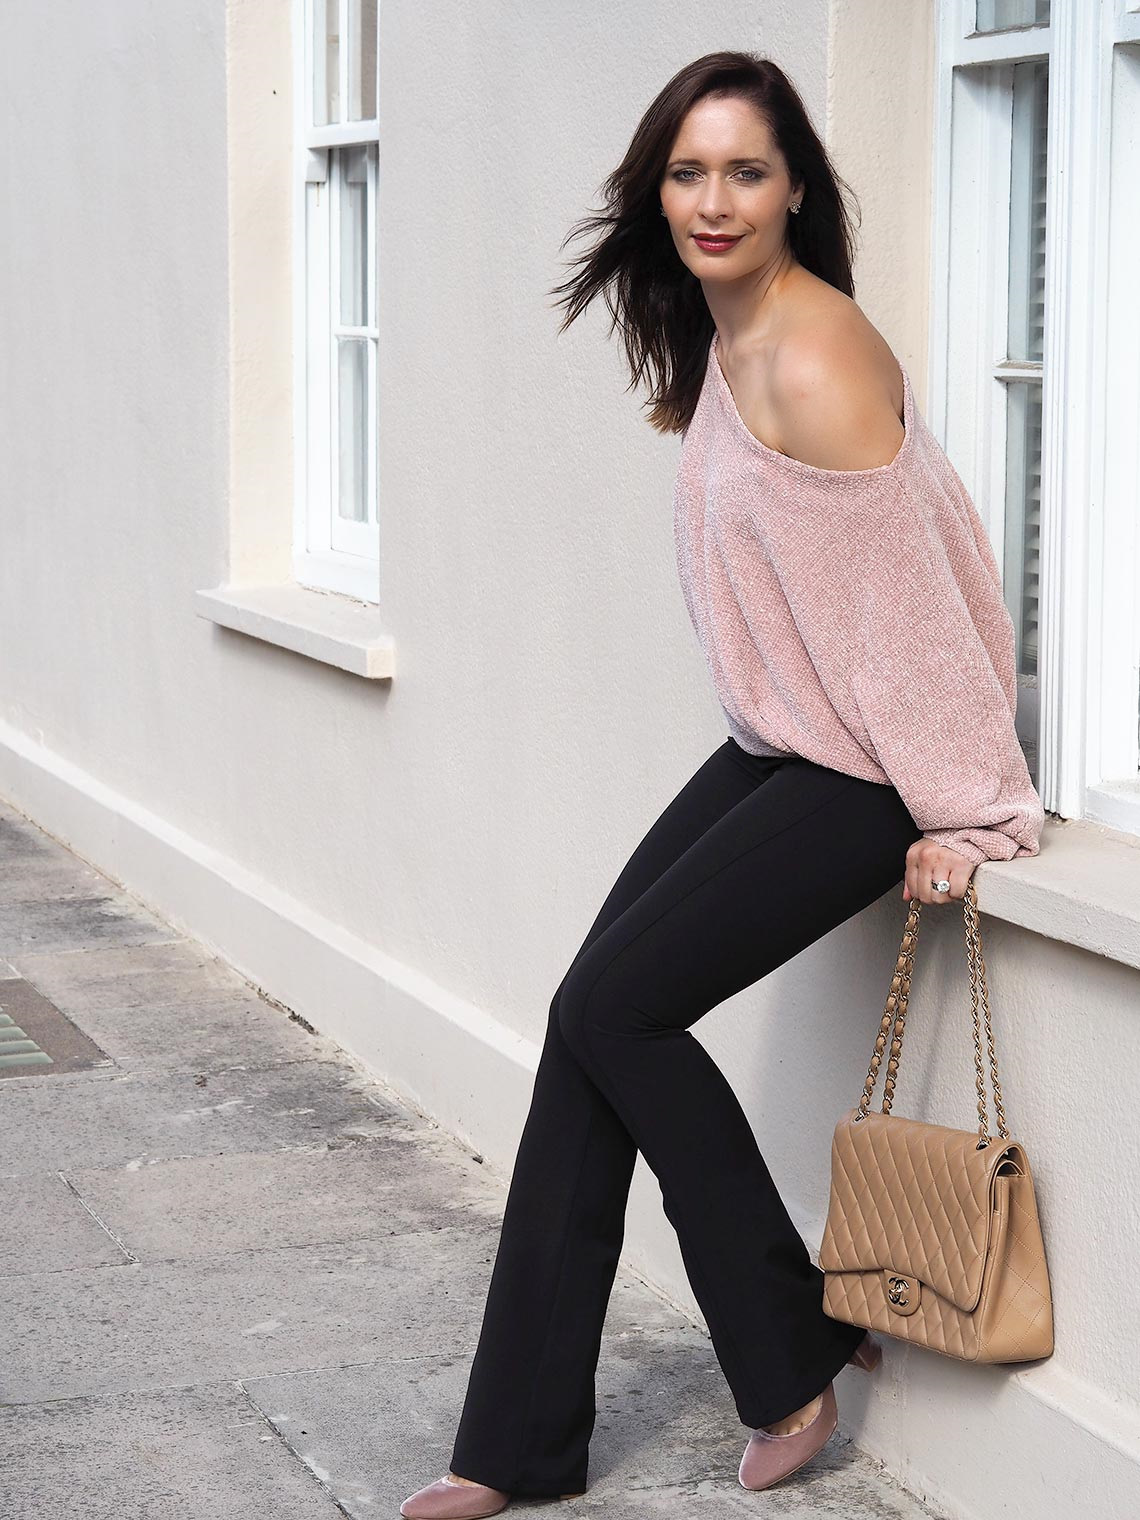 Chic Journal Petra wears off the shoulder trend sweater